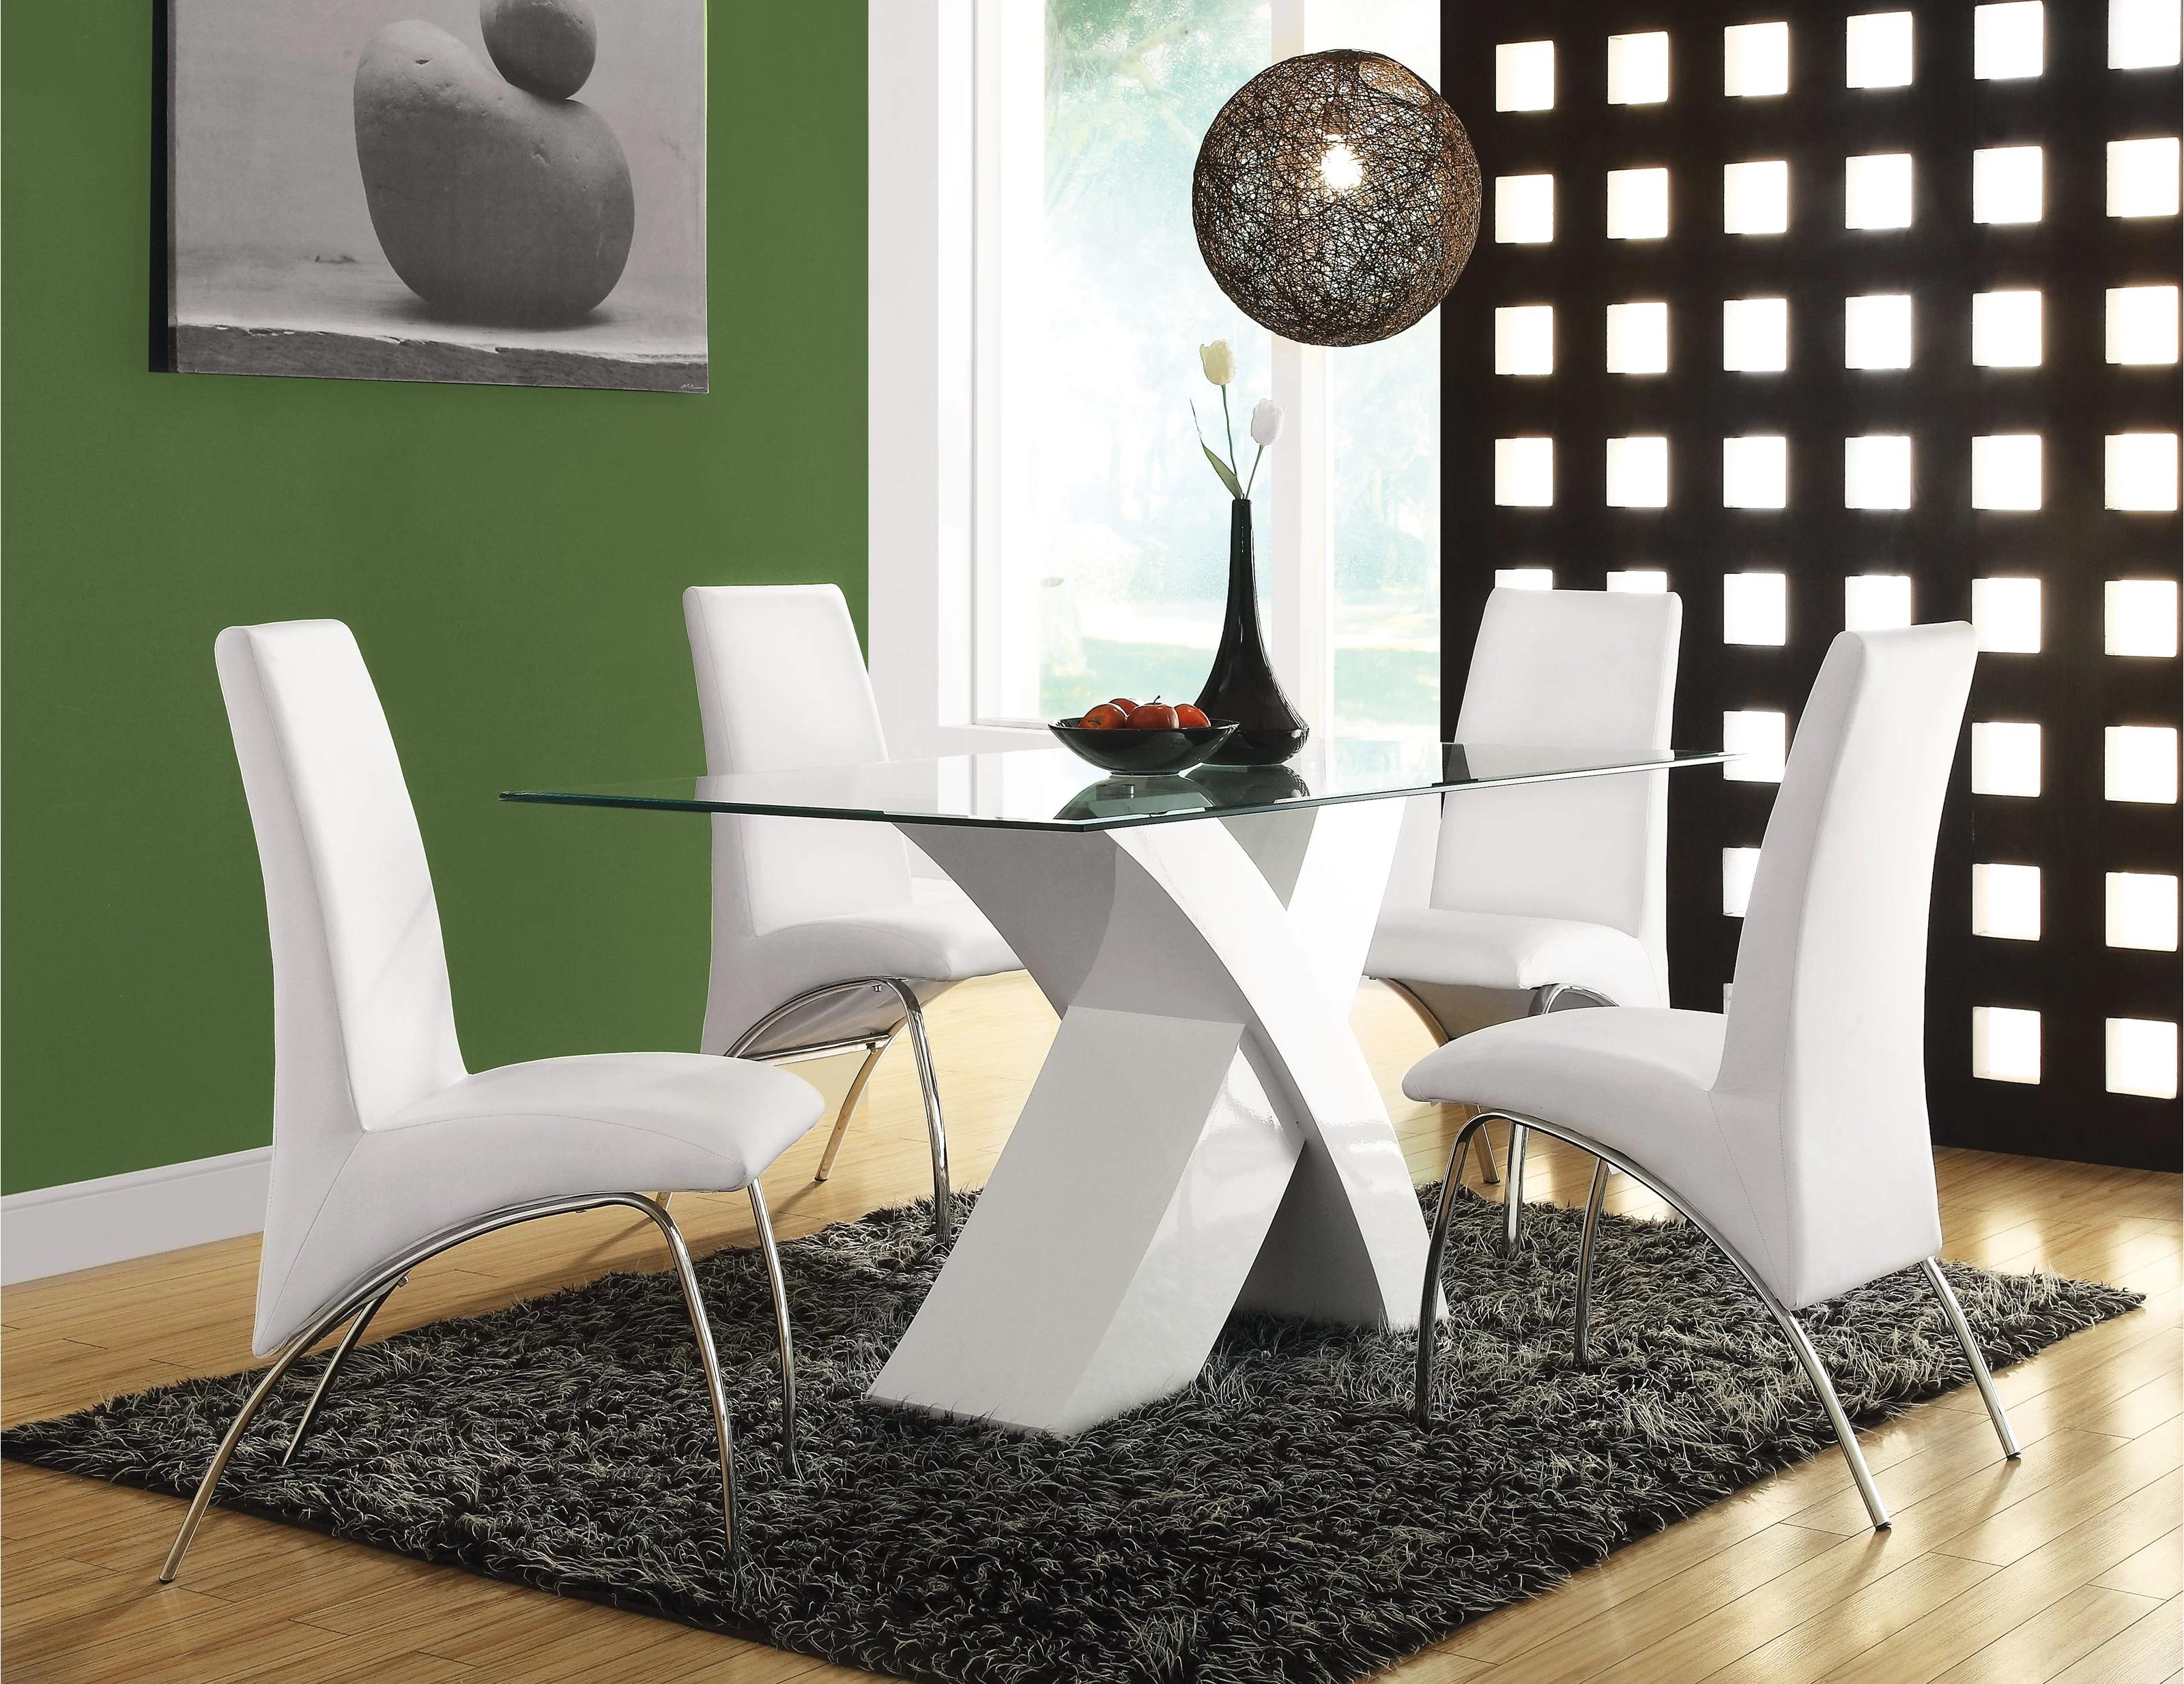 

    
Contemporary White & Clear Glass Dining Table + 4x Chairs by Acme Pervis 71105-5pcs
